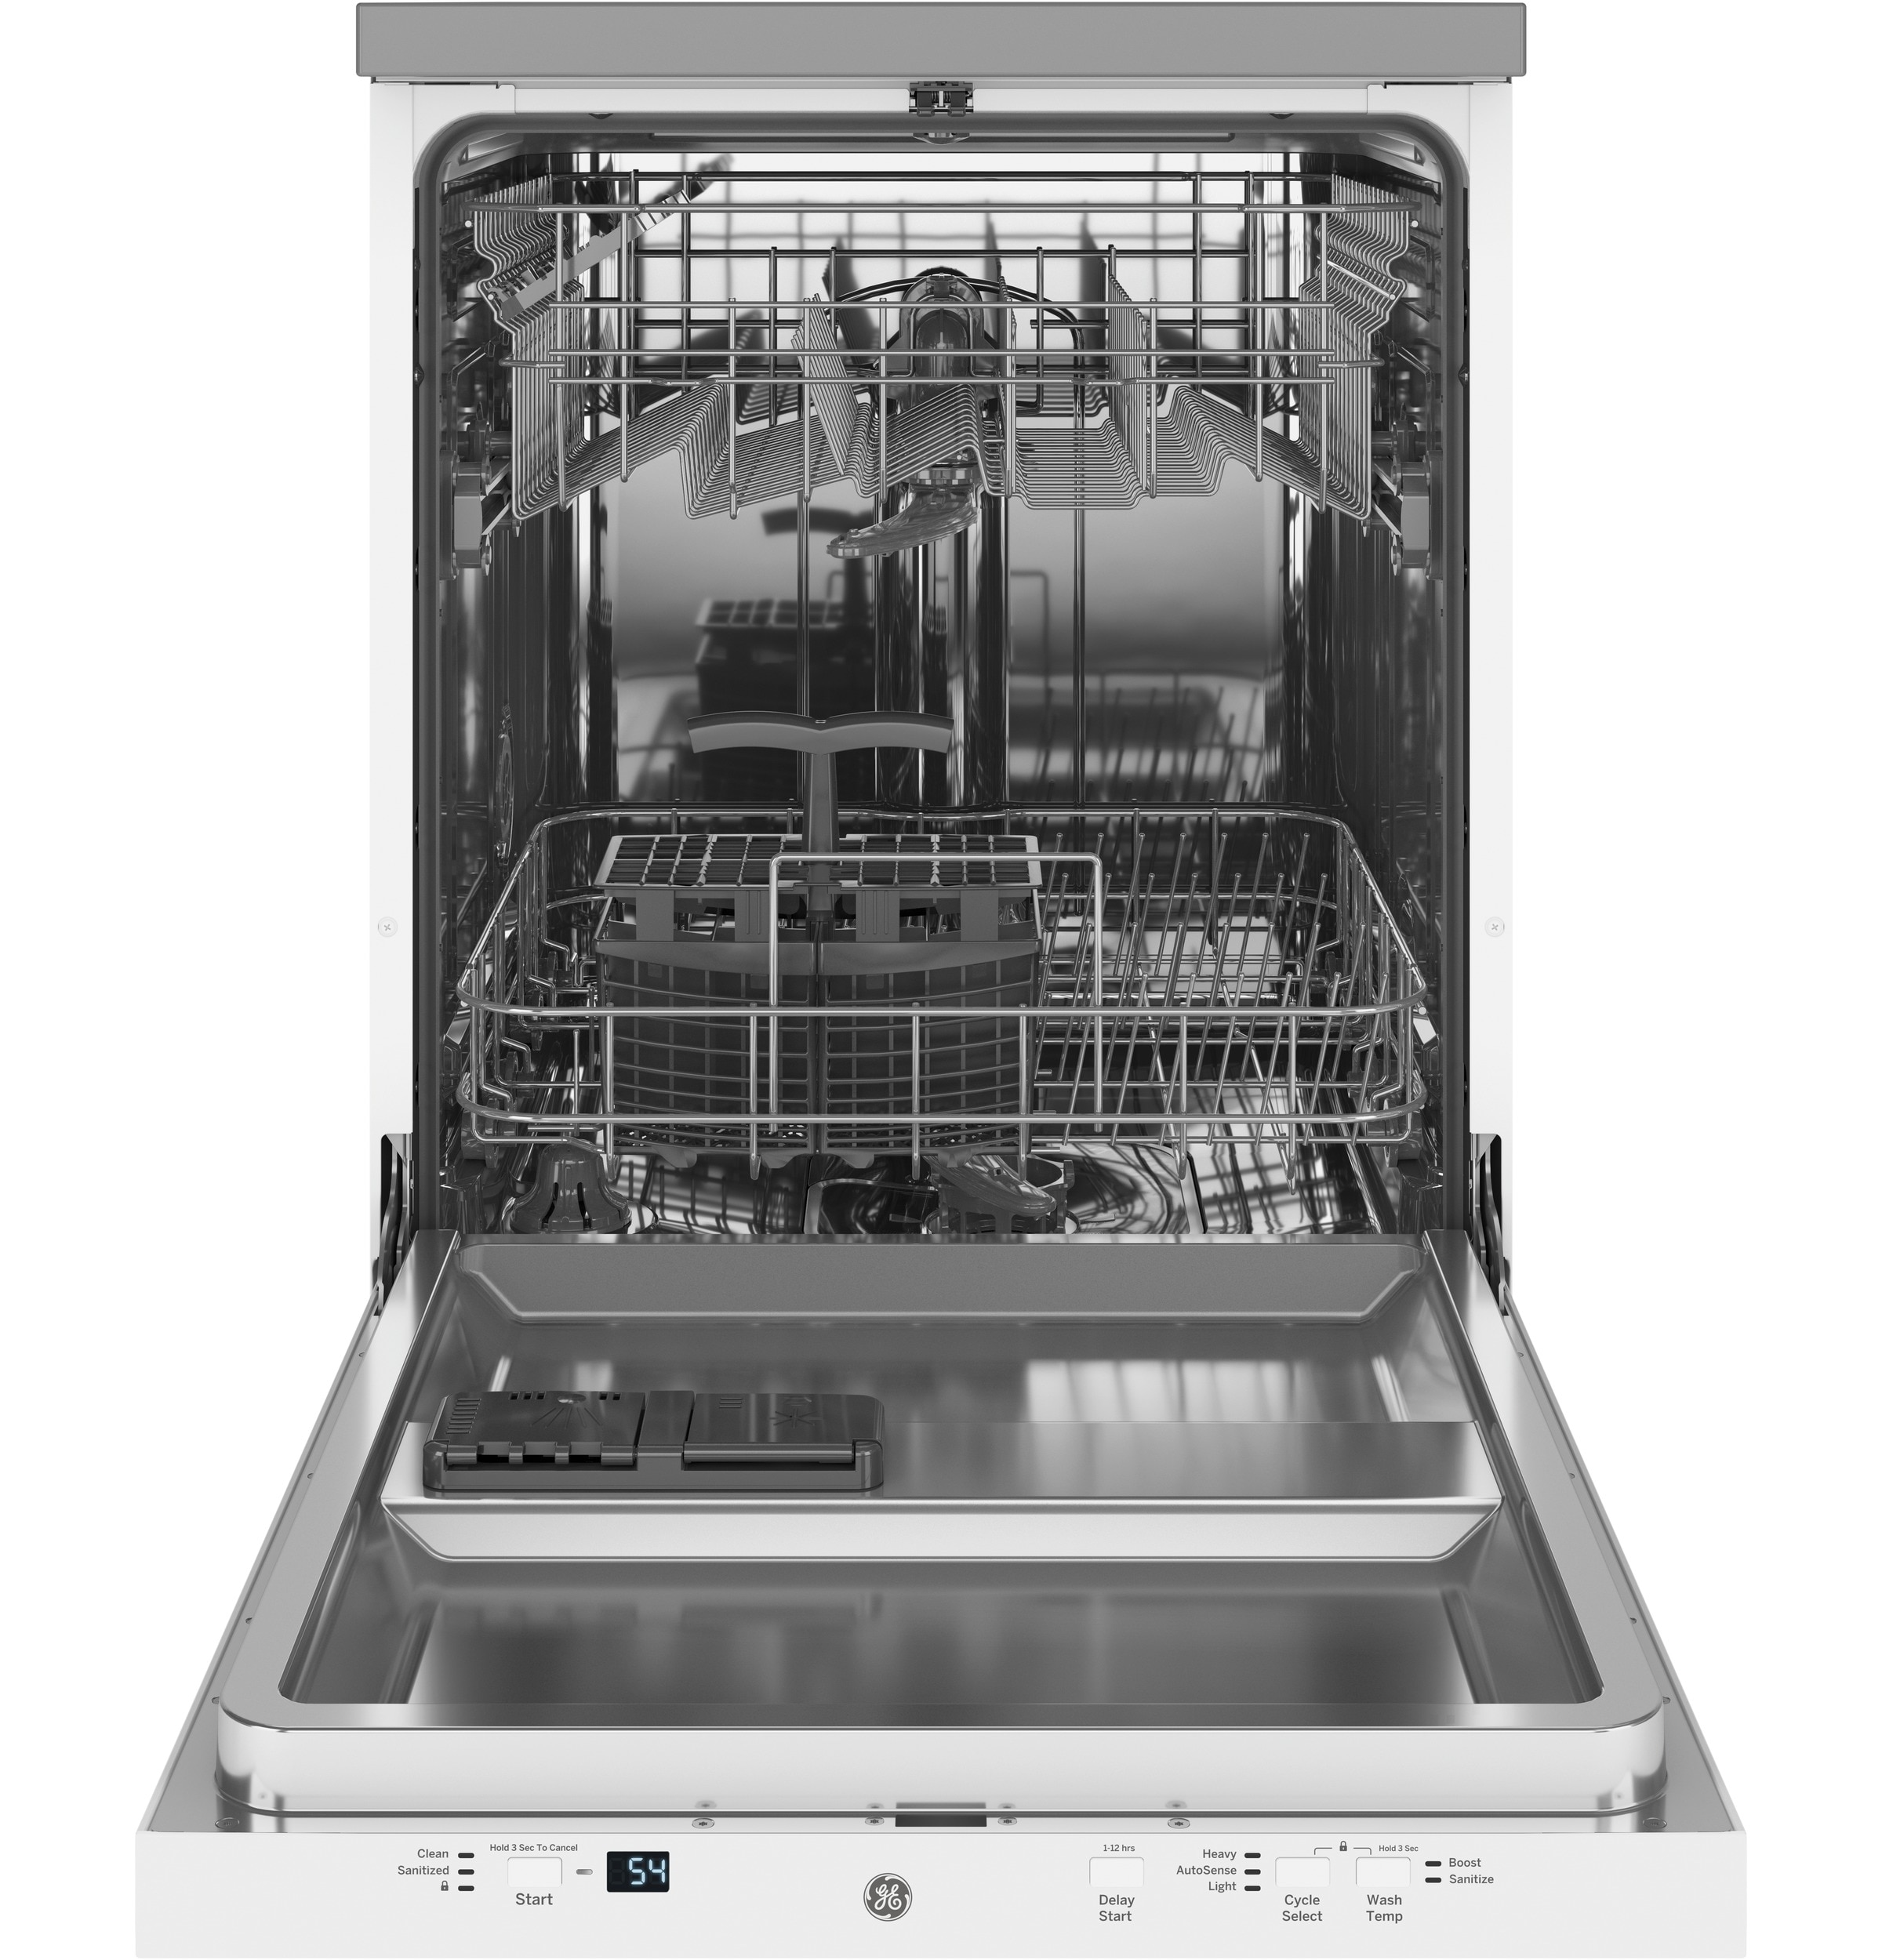 GE 23.625-in Portable Freestanding Dishwasher (Used, Excellent Condition)